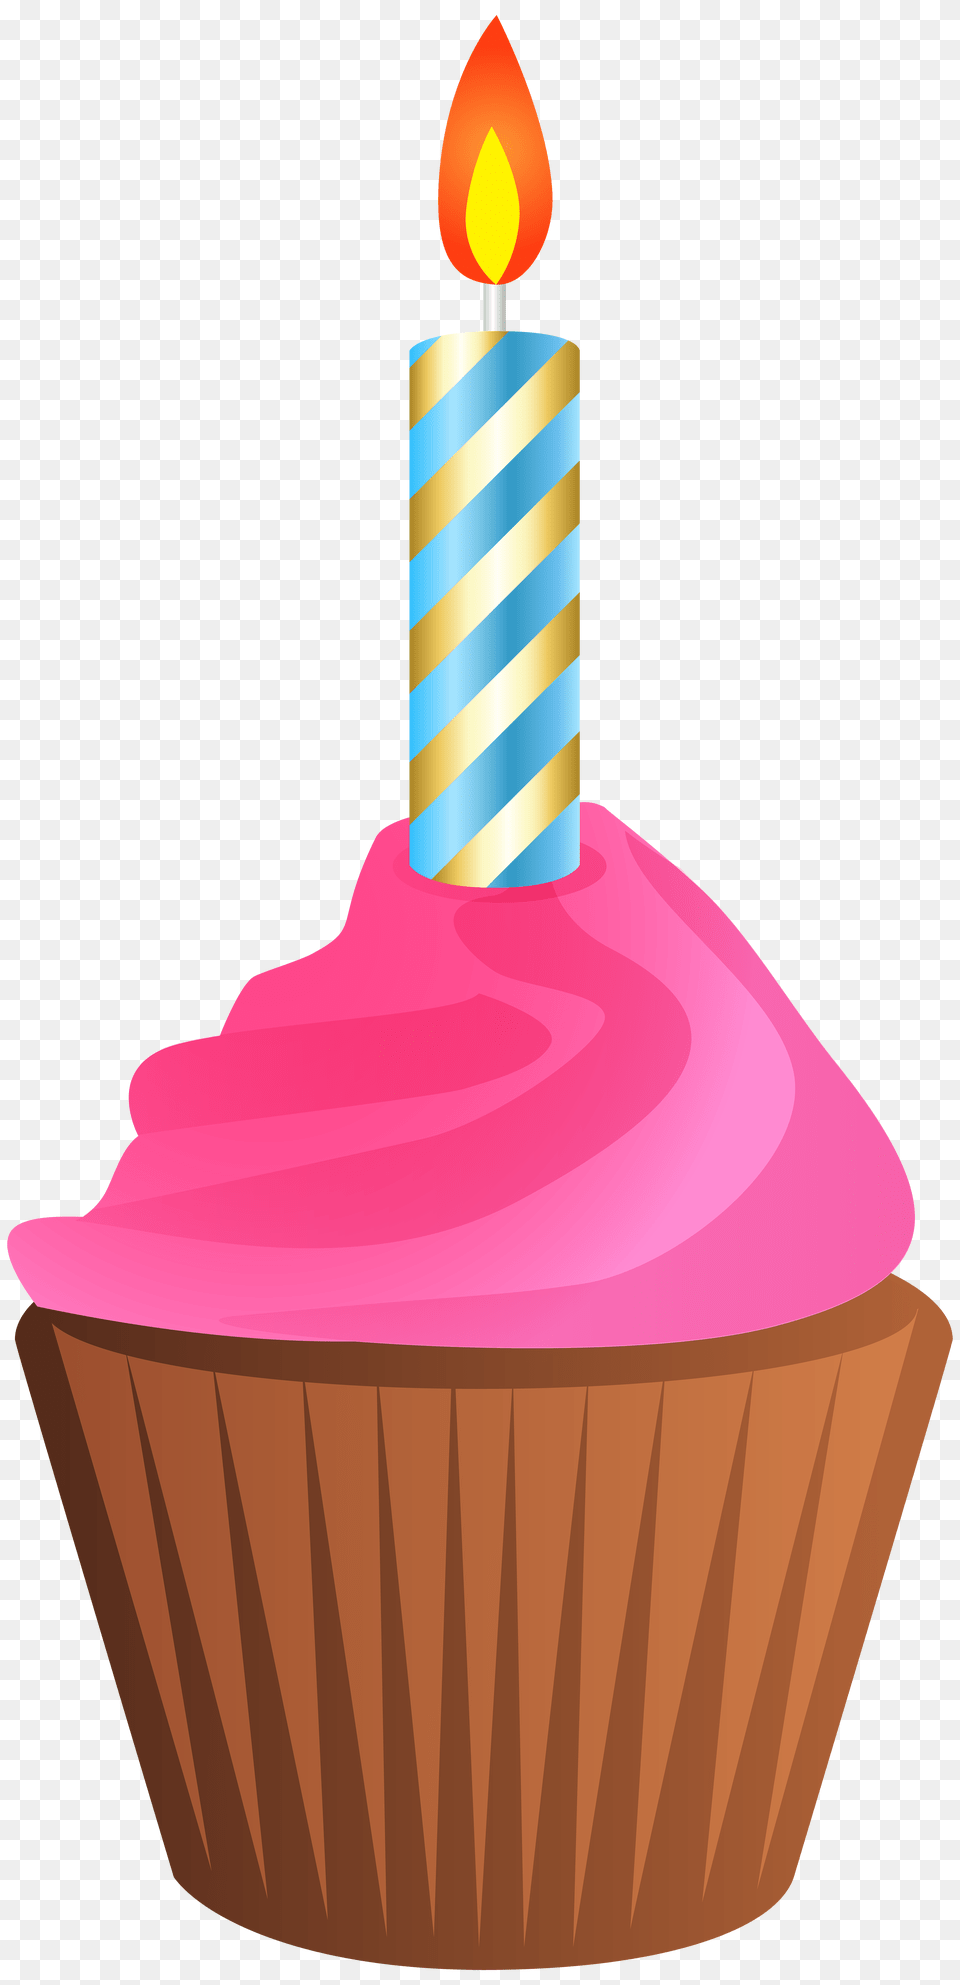 Birthday Muffin With Candle Clip Art Gallery, Cake, Cream, Cupcake, Dessert Png